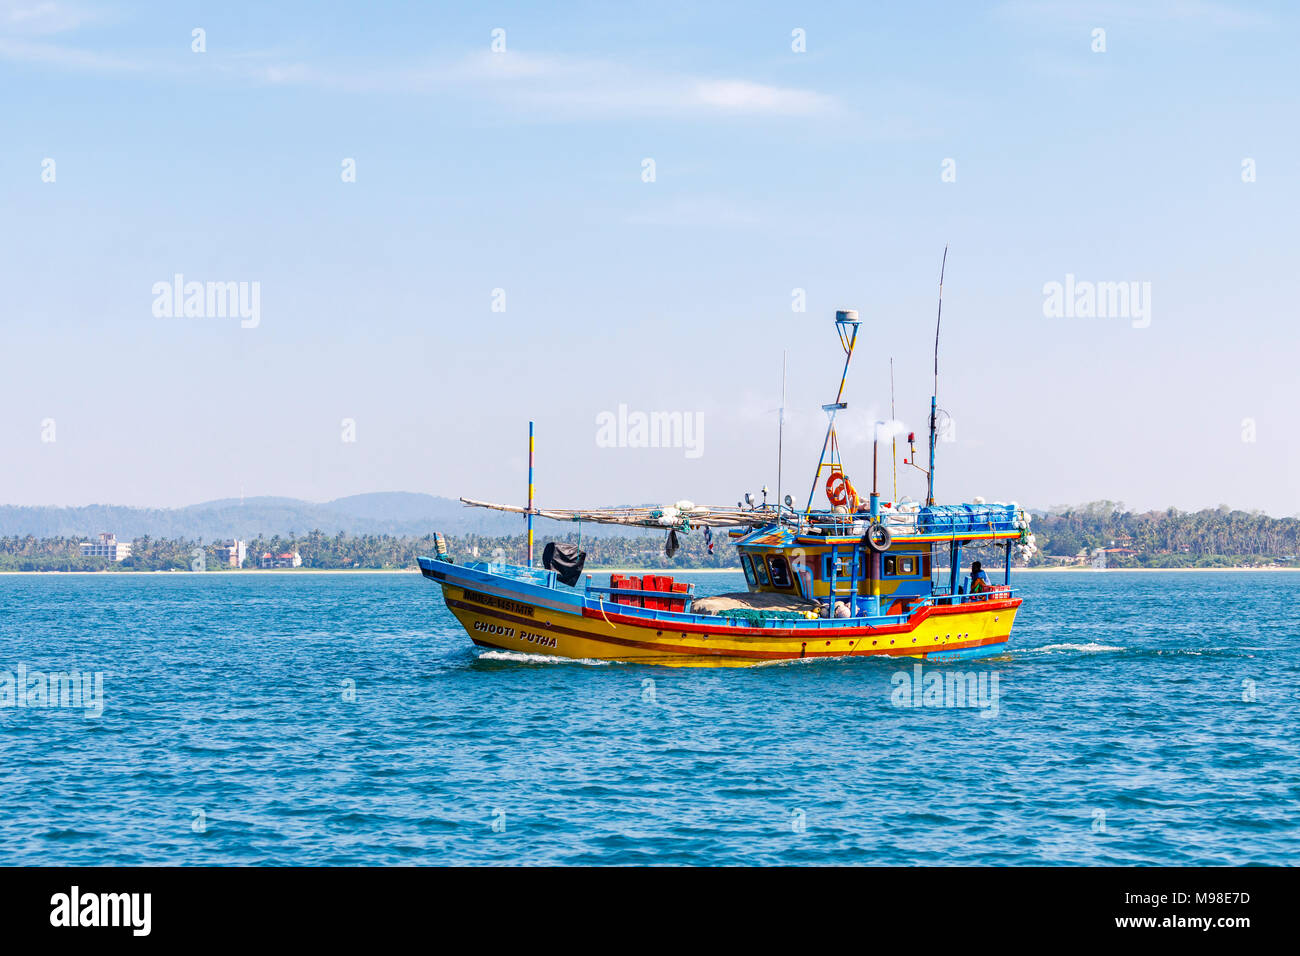 Colourful typical wooden small fishing boat at sea sailing in Weligama Bay, Mirissa, on the south coast of Sri Lanka Stock Photo